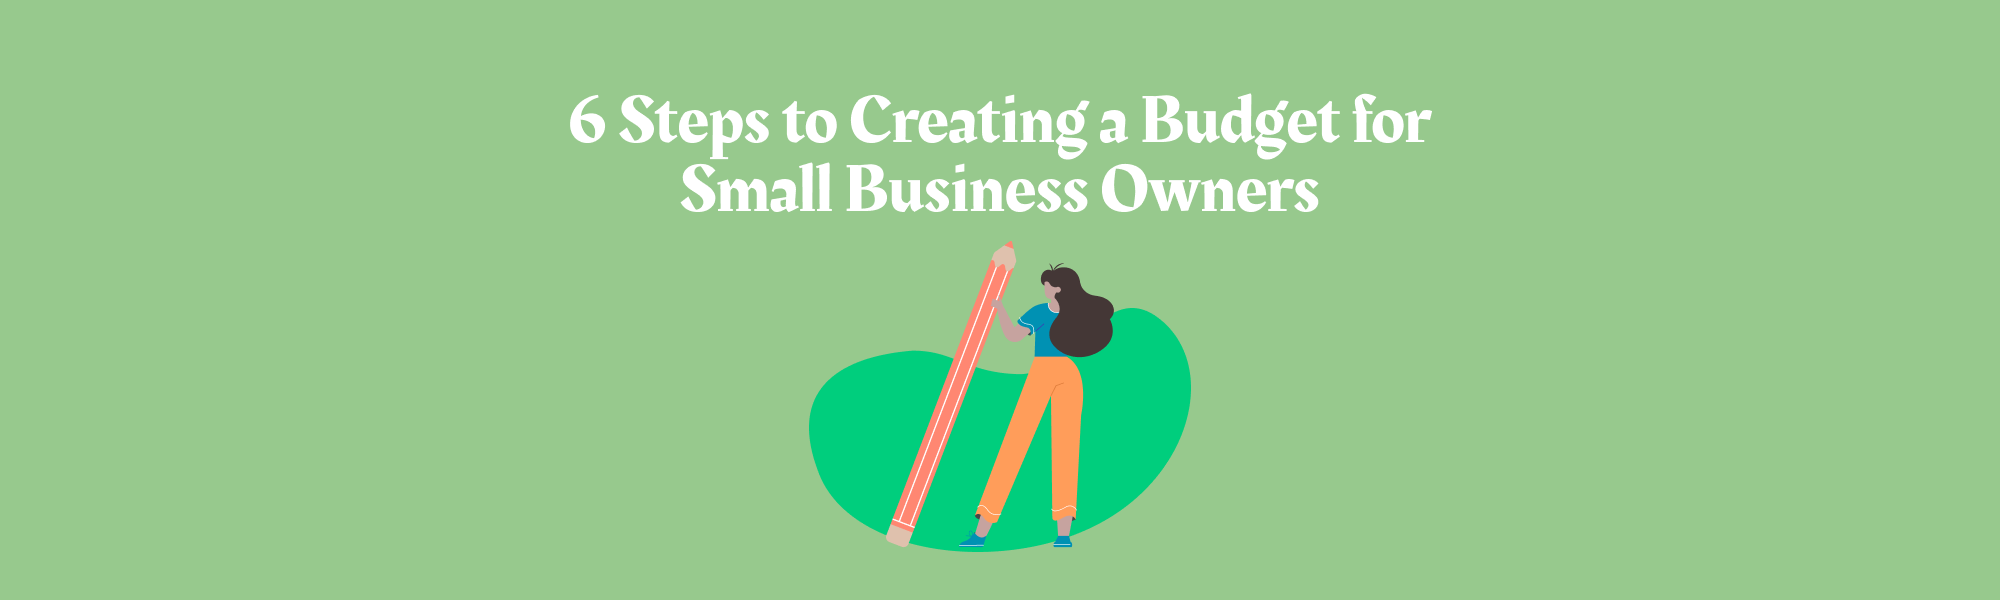 small-business-owner-creating-a-budget